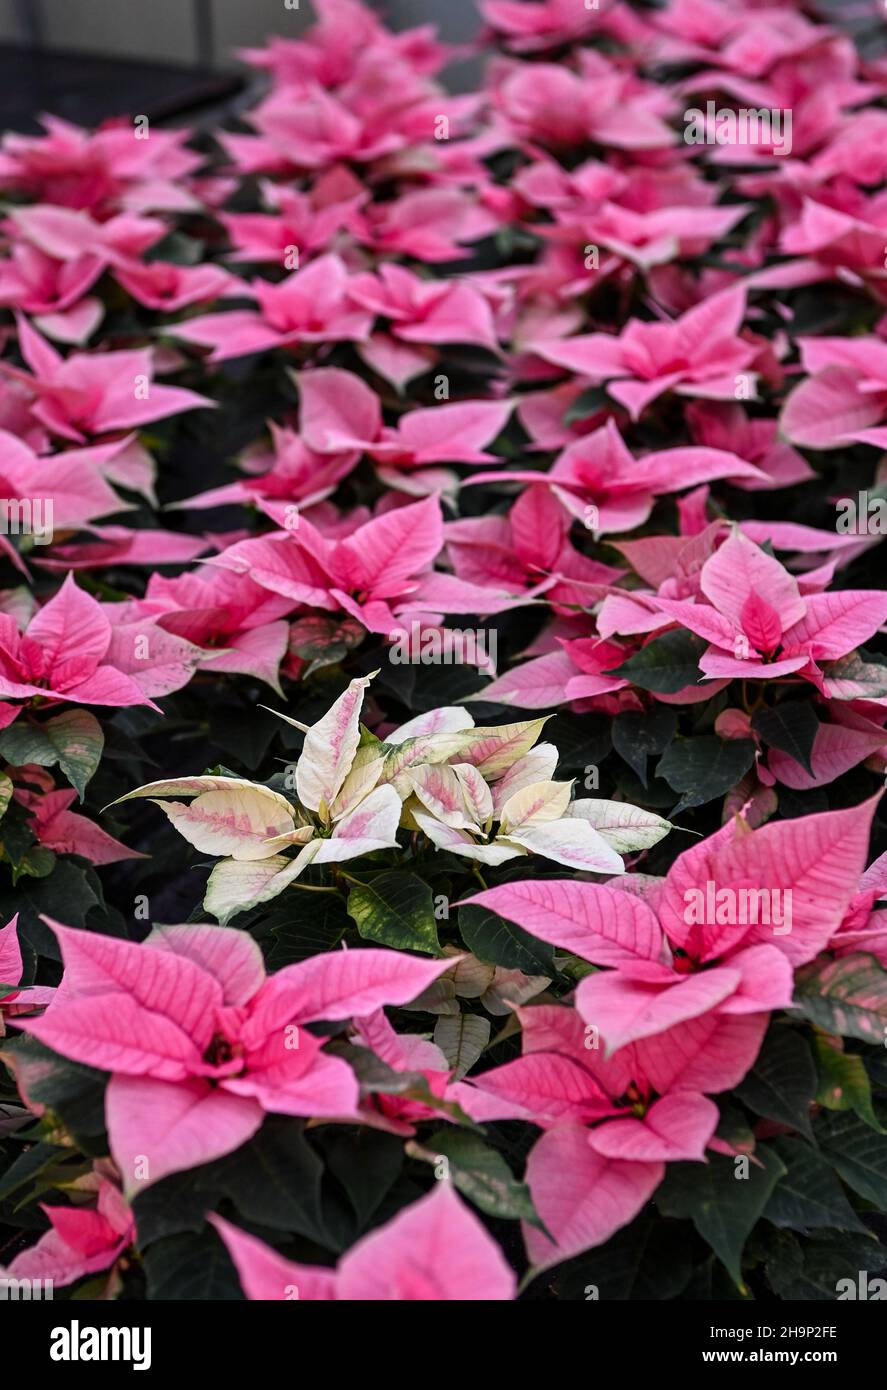 07 December 2021, Brandenburg, Schöneiche: Numerous colourful flowering poinsettias stand in a greenhouse at the Flora-Land Arnold nursery. They are currently the best sellers at Christmas time. The seasonal products are grown here in the nursery's own greenhouses, brought into bloom and sold on site. Photo: Jens Kalaene/dpa-Zentralbild/ZB Stock Photo